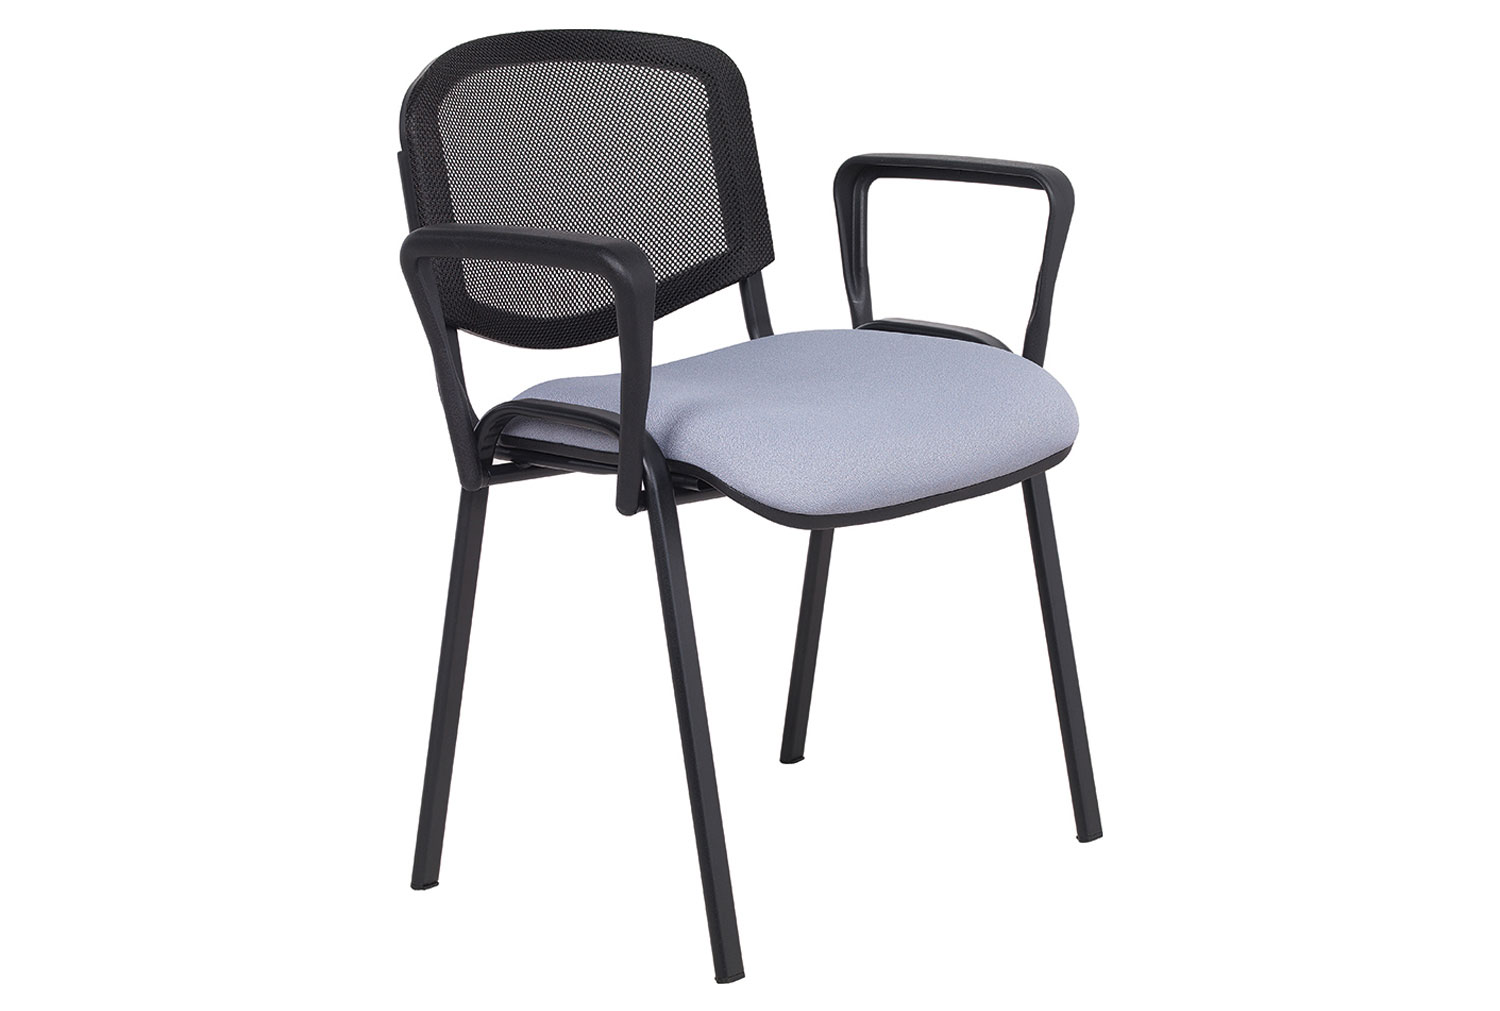 Pack of 4 Sevron Mesh Back Stacking Conference Stacking ArmOffice Chairs, Chrome Frame, Prime